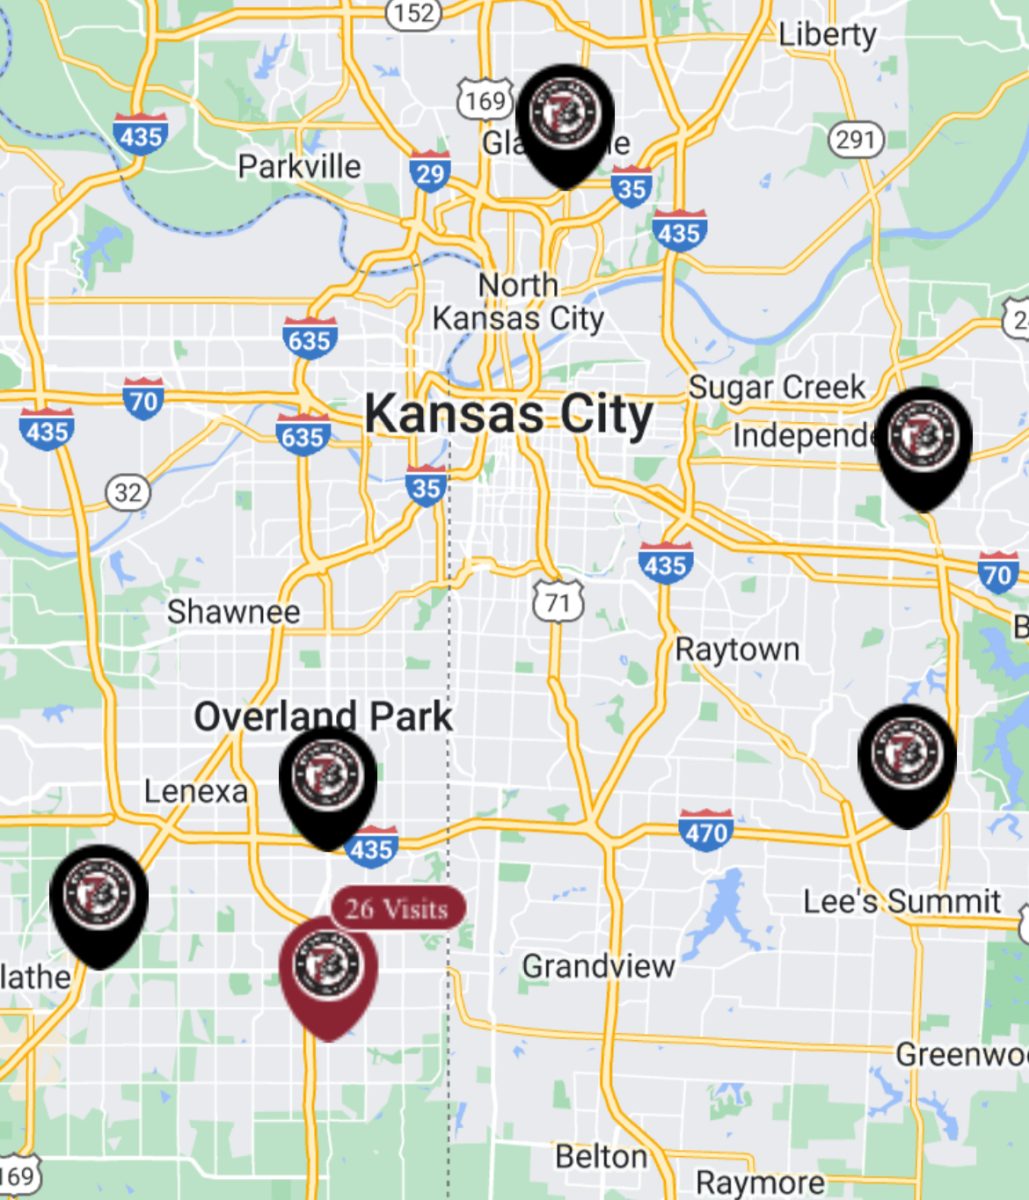 Here is a map of 7 Brew locations in the area. 
